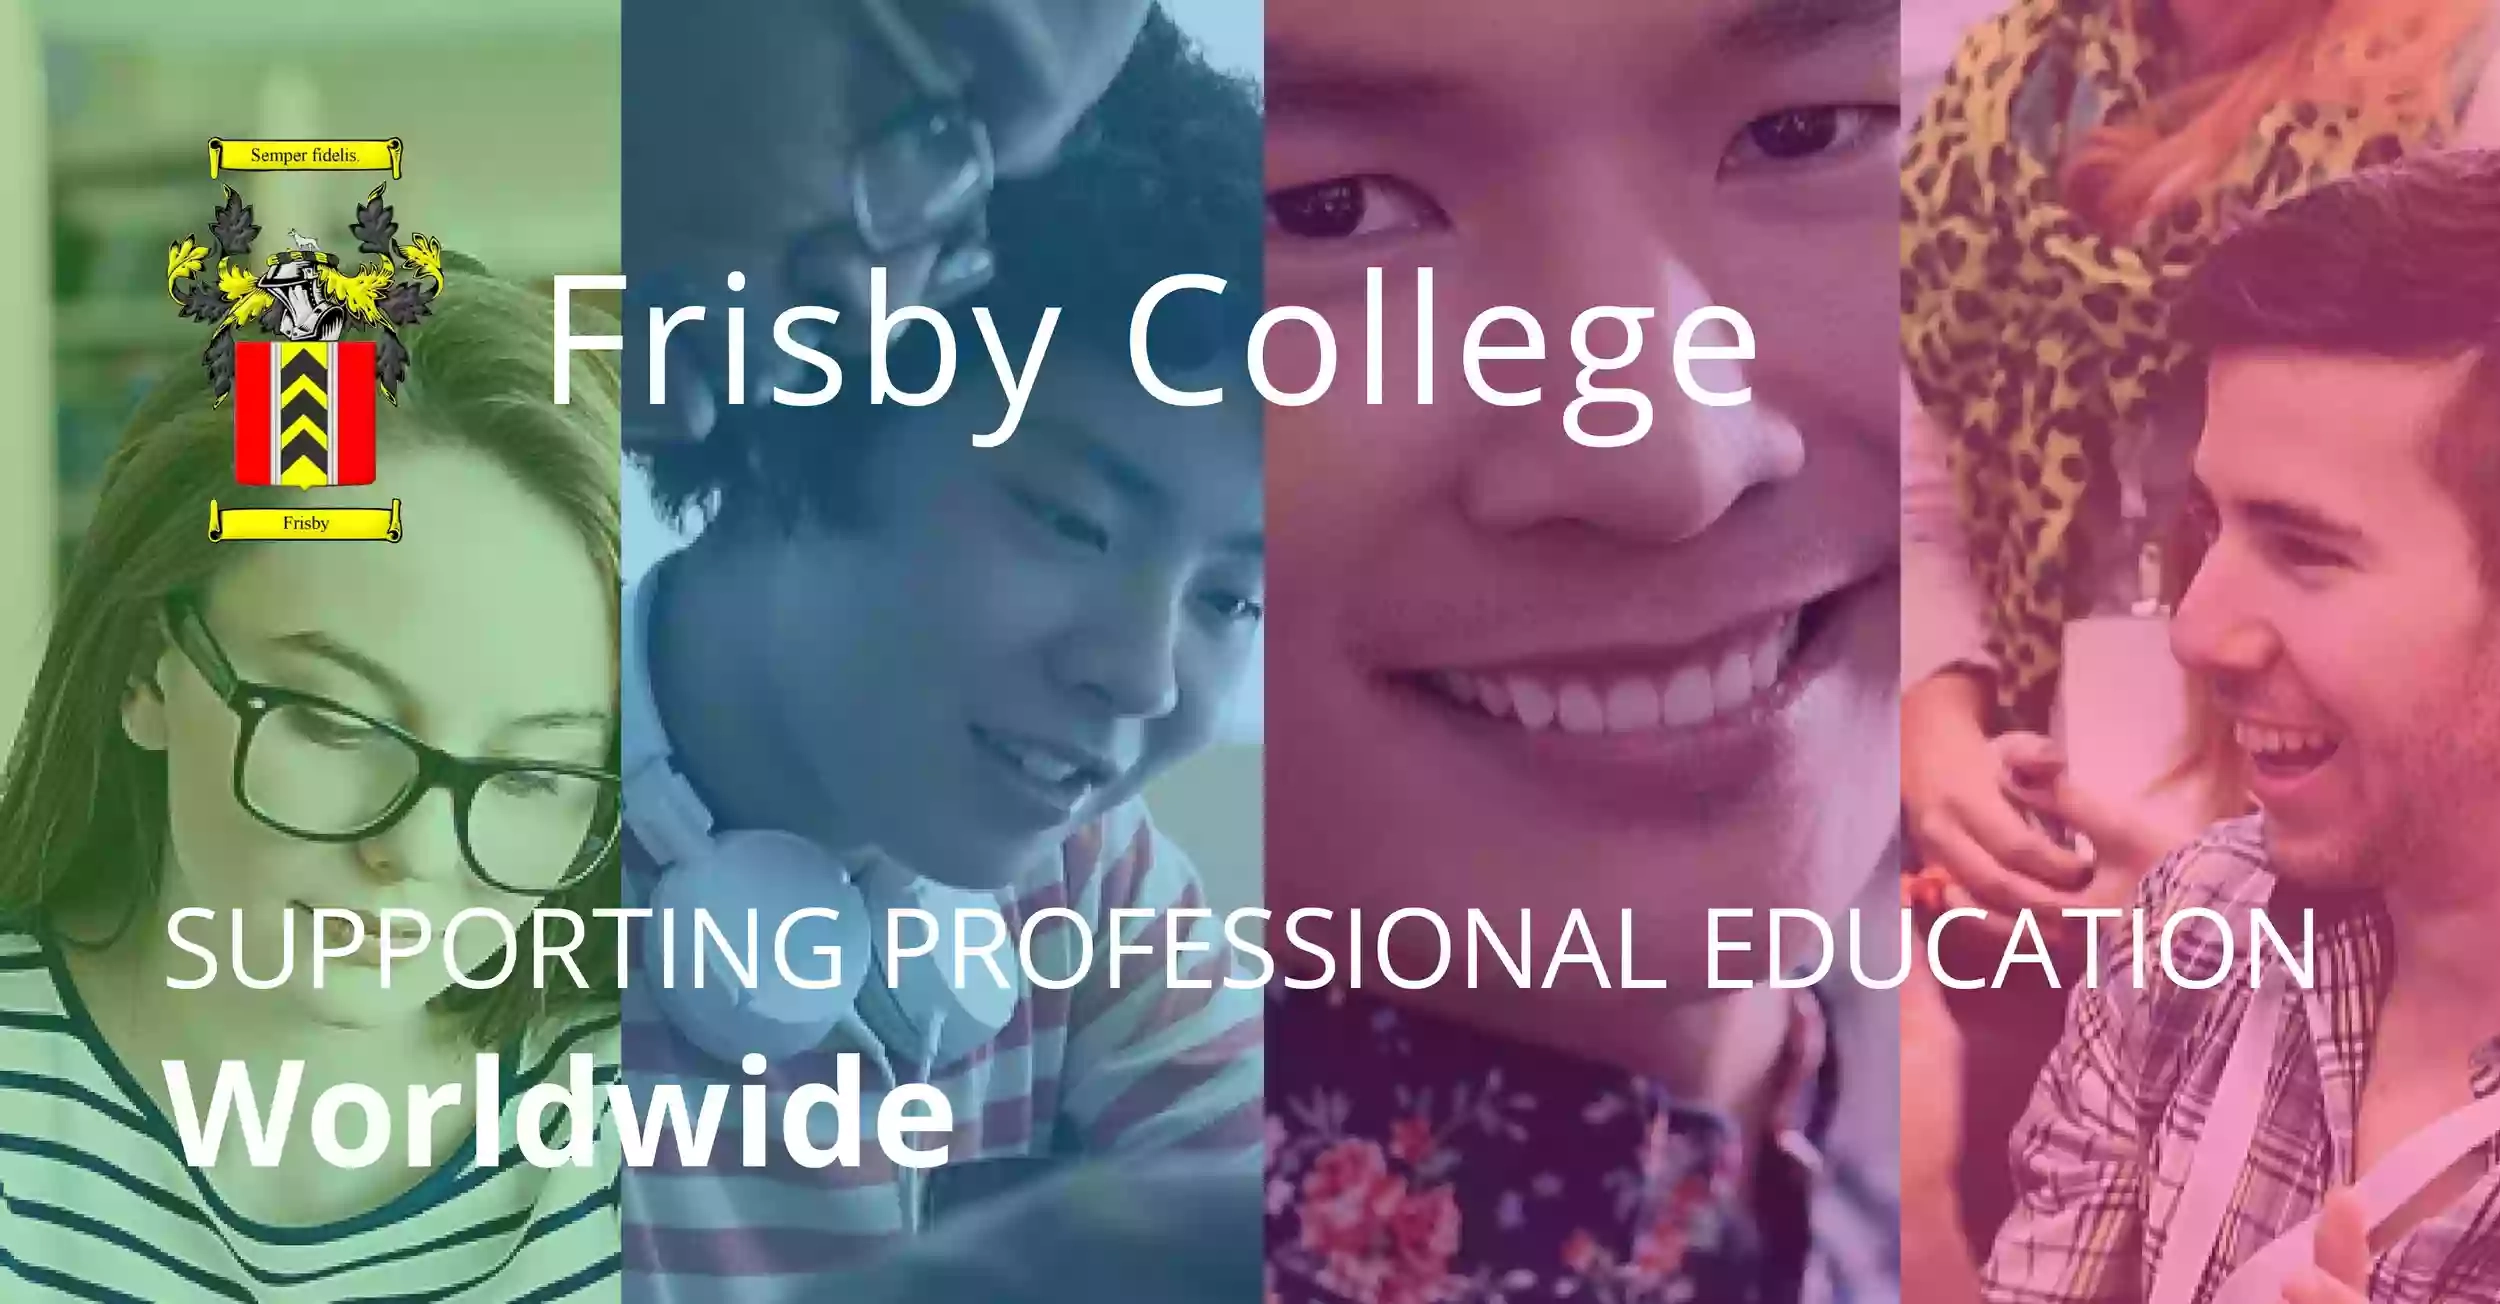 Frisby's College